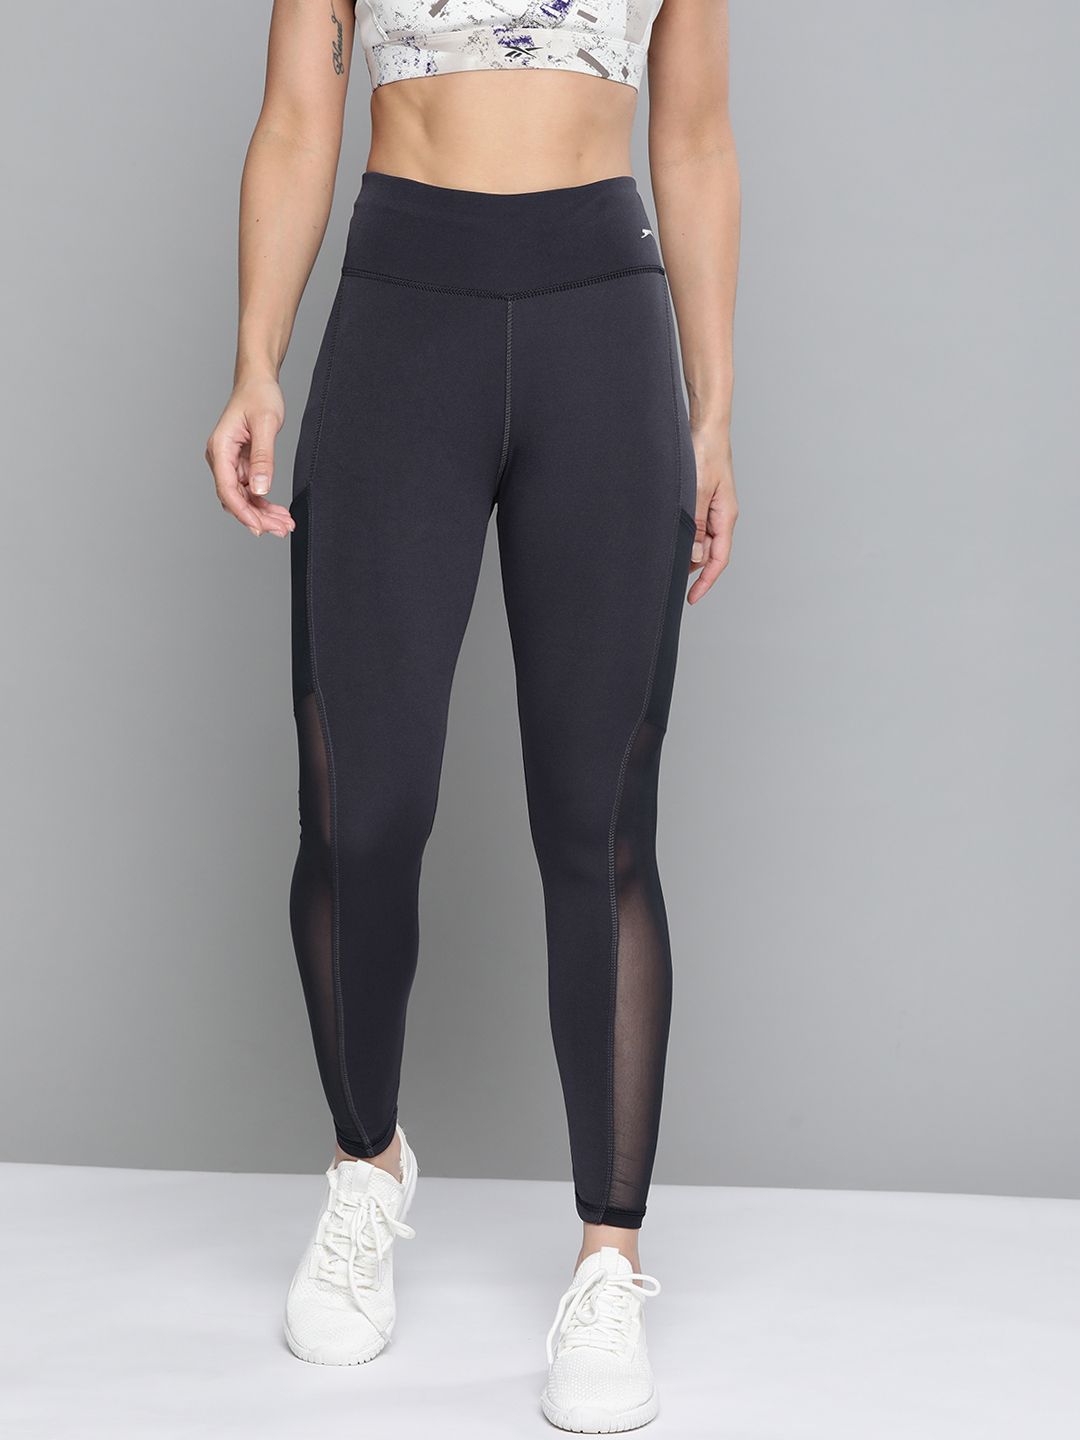 Slazenger Women Charcoal Grey Solid Mesh Insert Tights Price in India